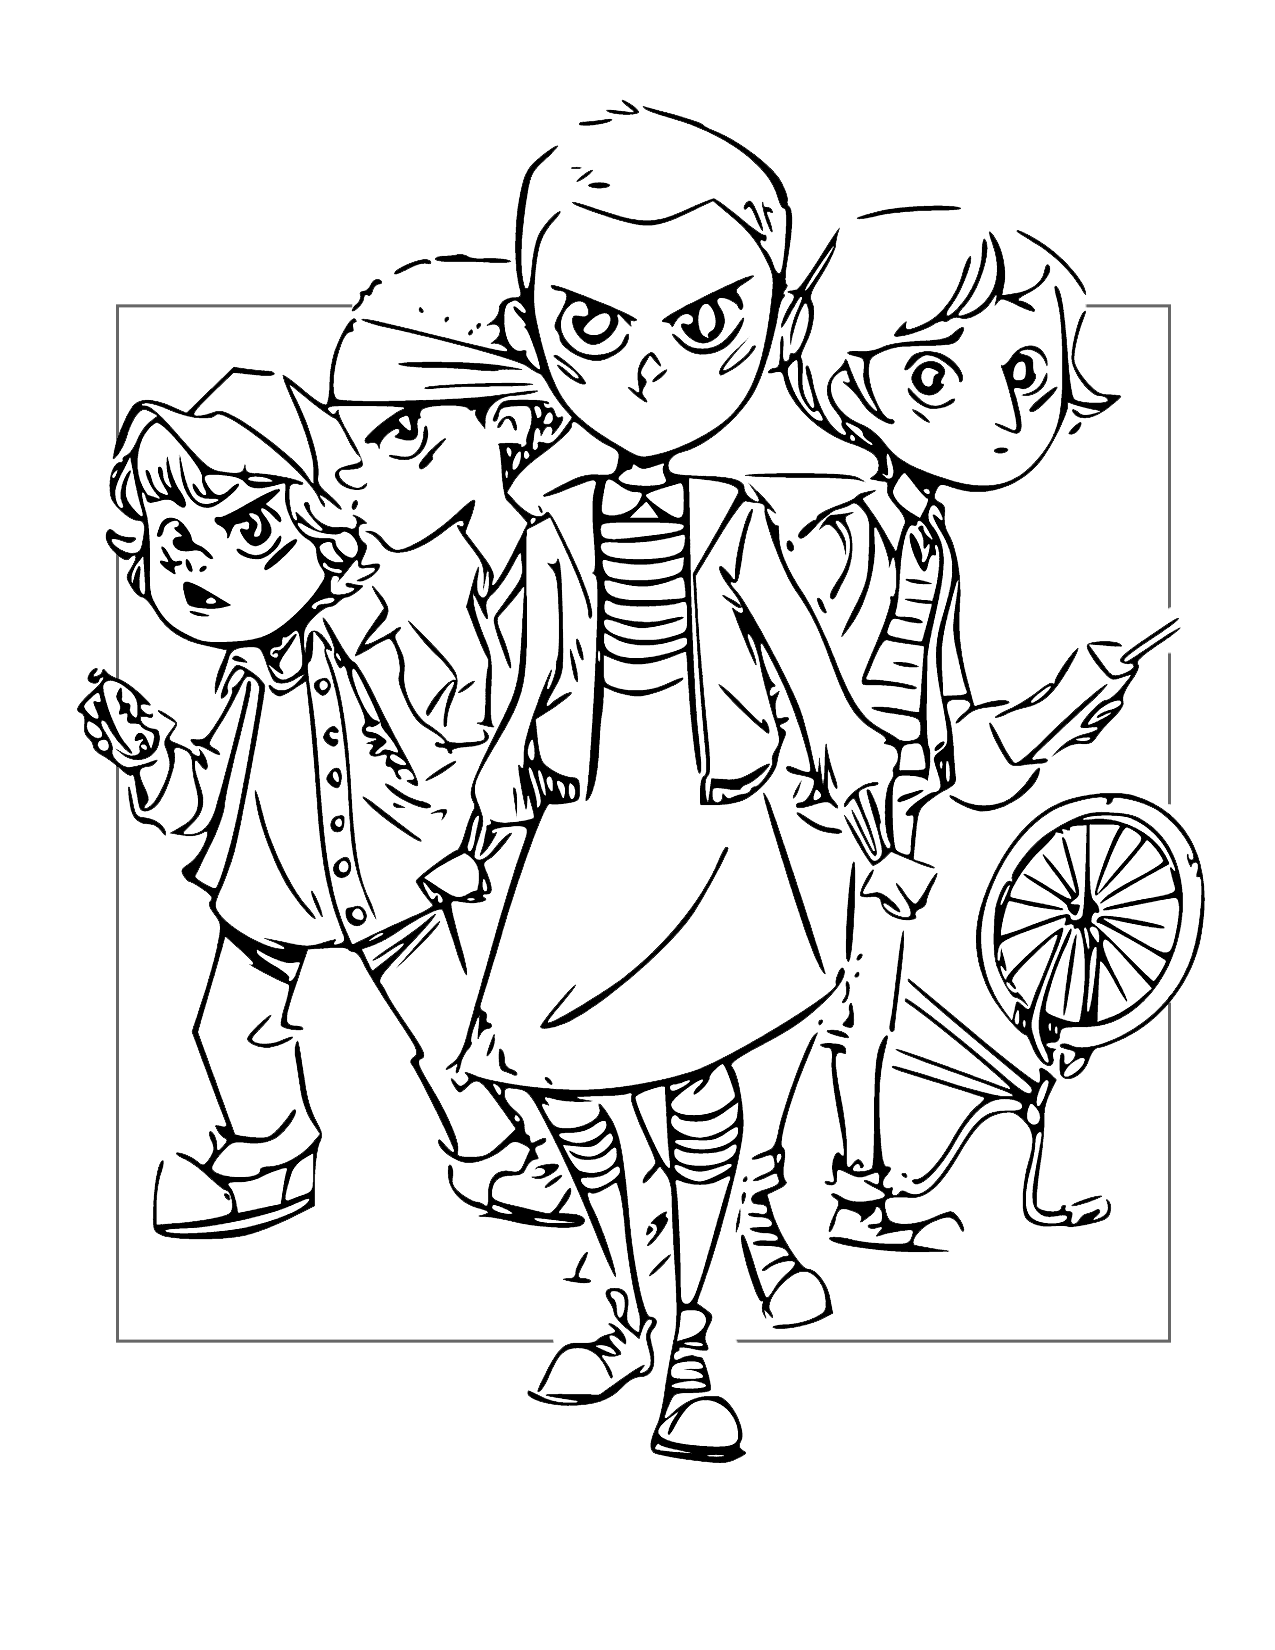 Cute Stranger Things Coloring Page